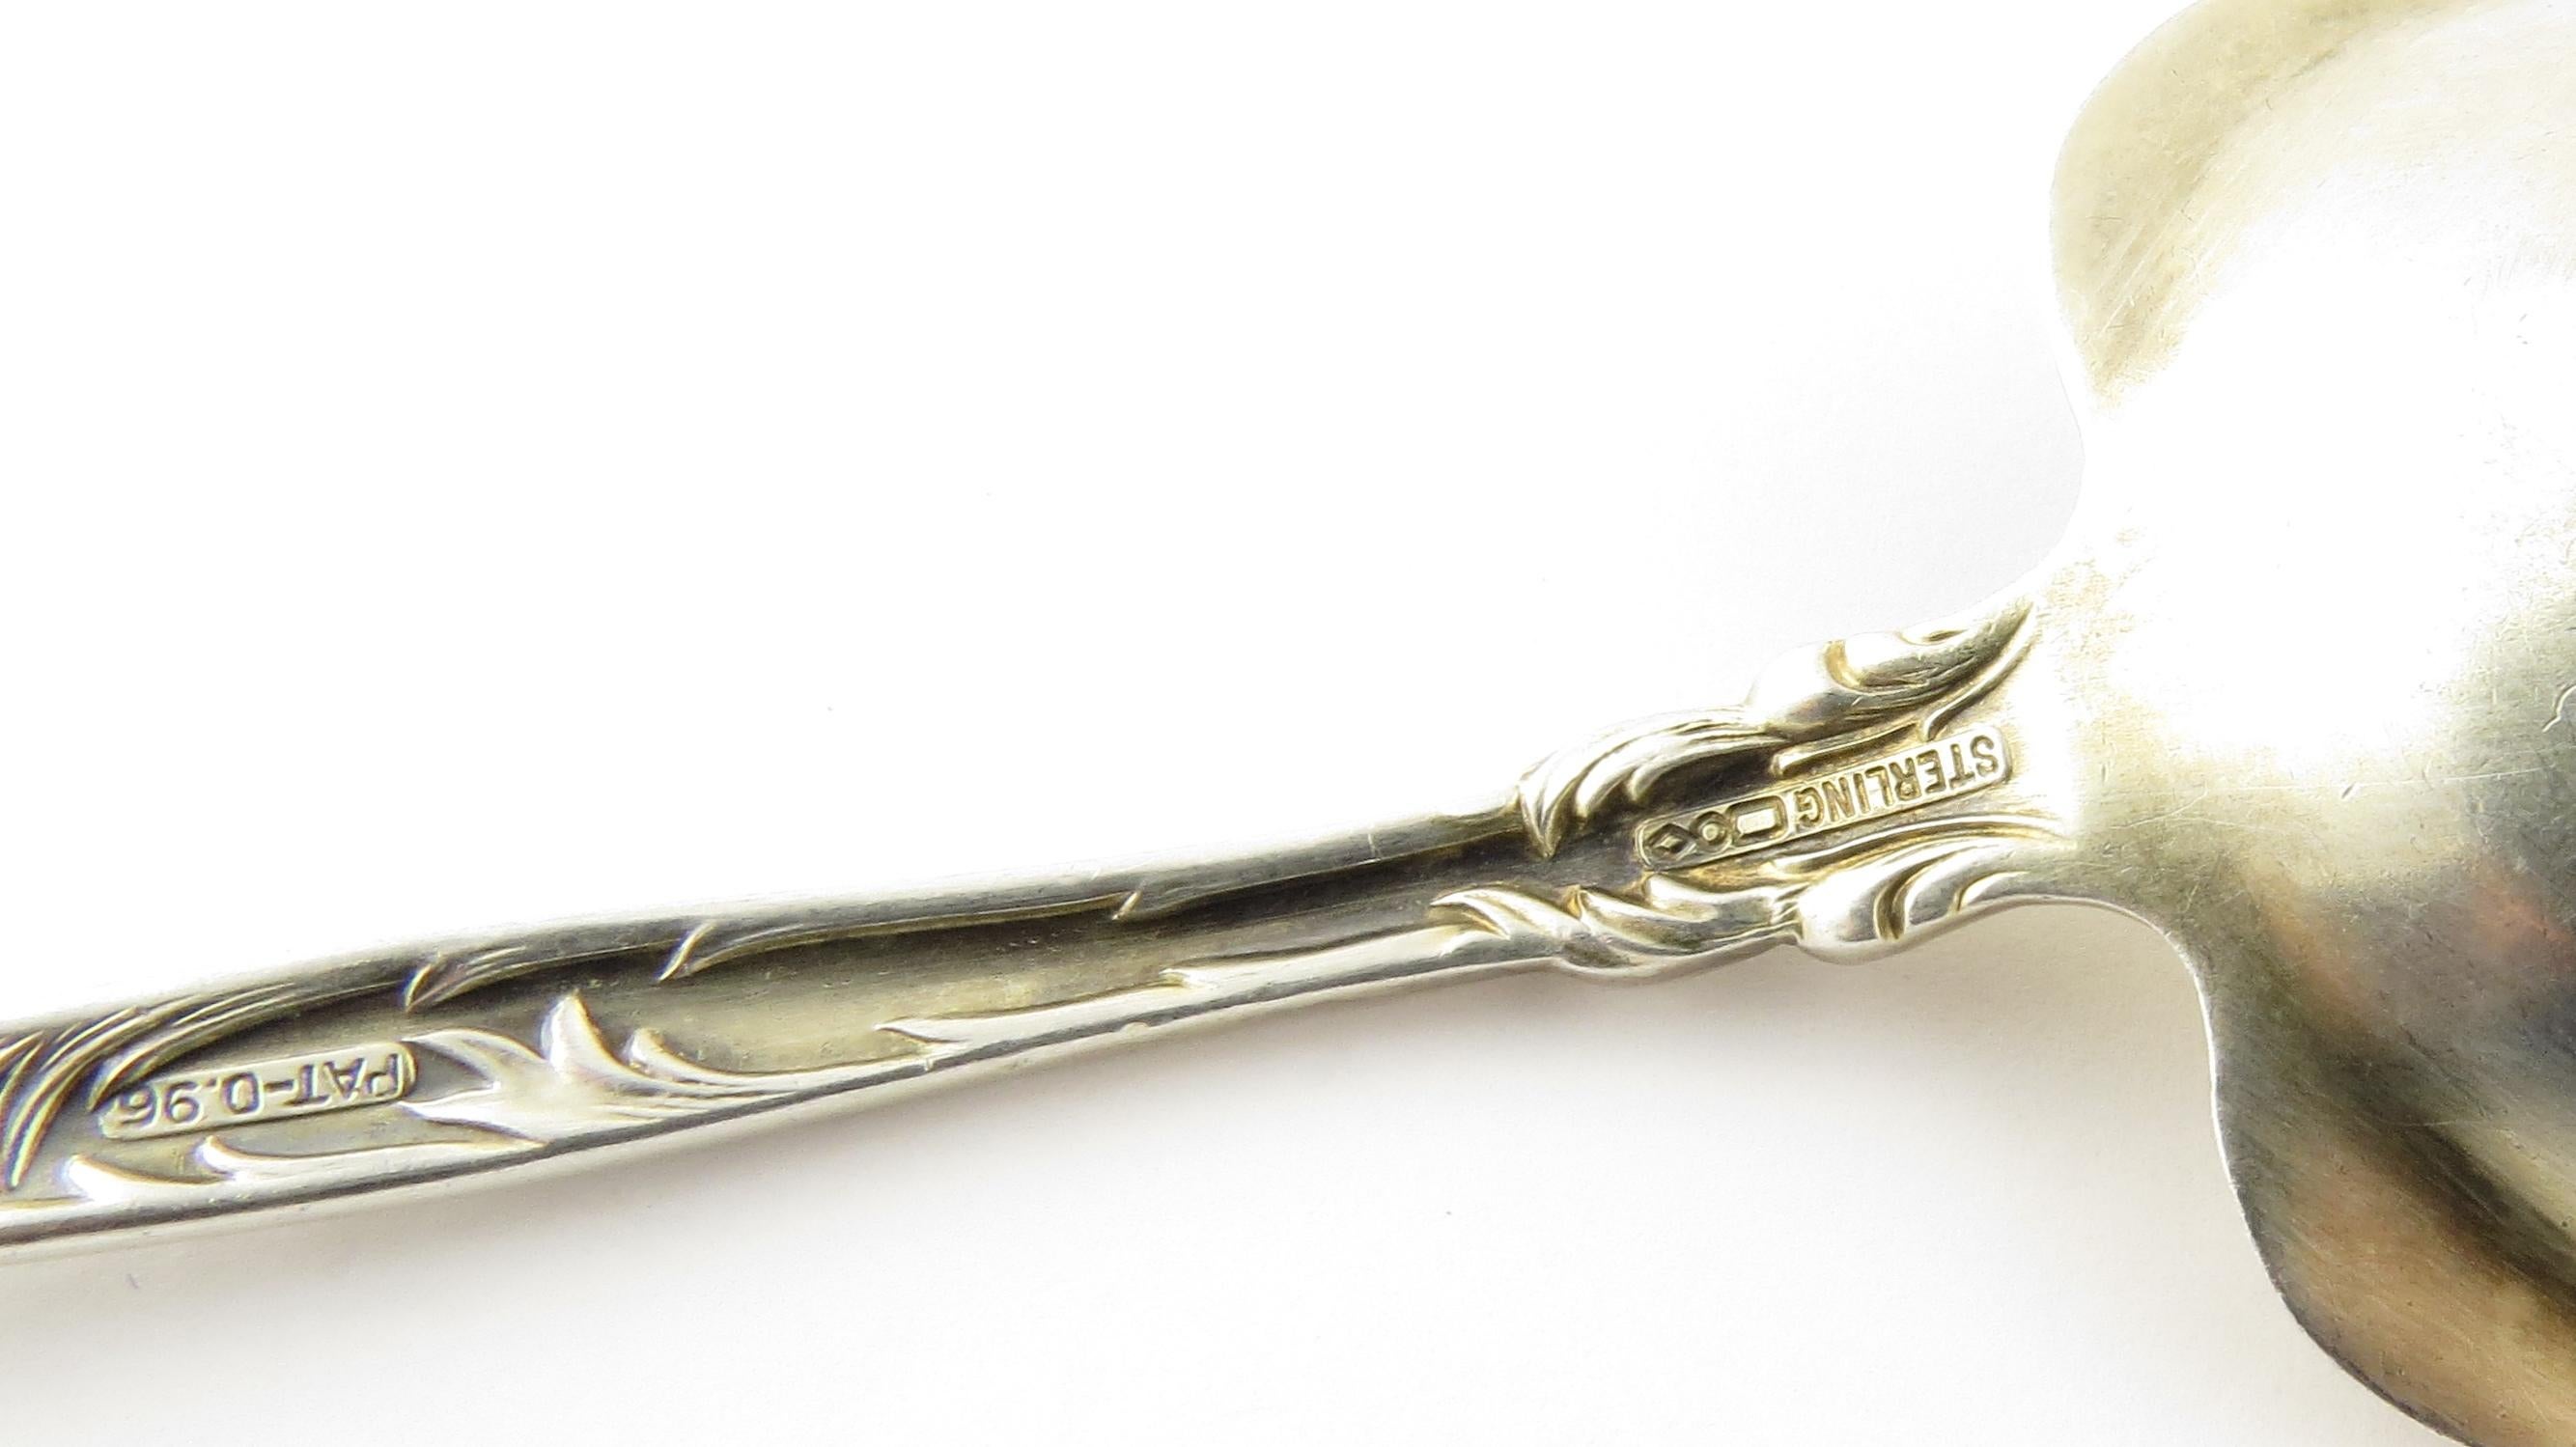 Late 19th Century Dominick & Haff No.10 Sterling Silver Enameled Gilt Small Berry Spoon For Sale